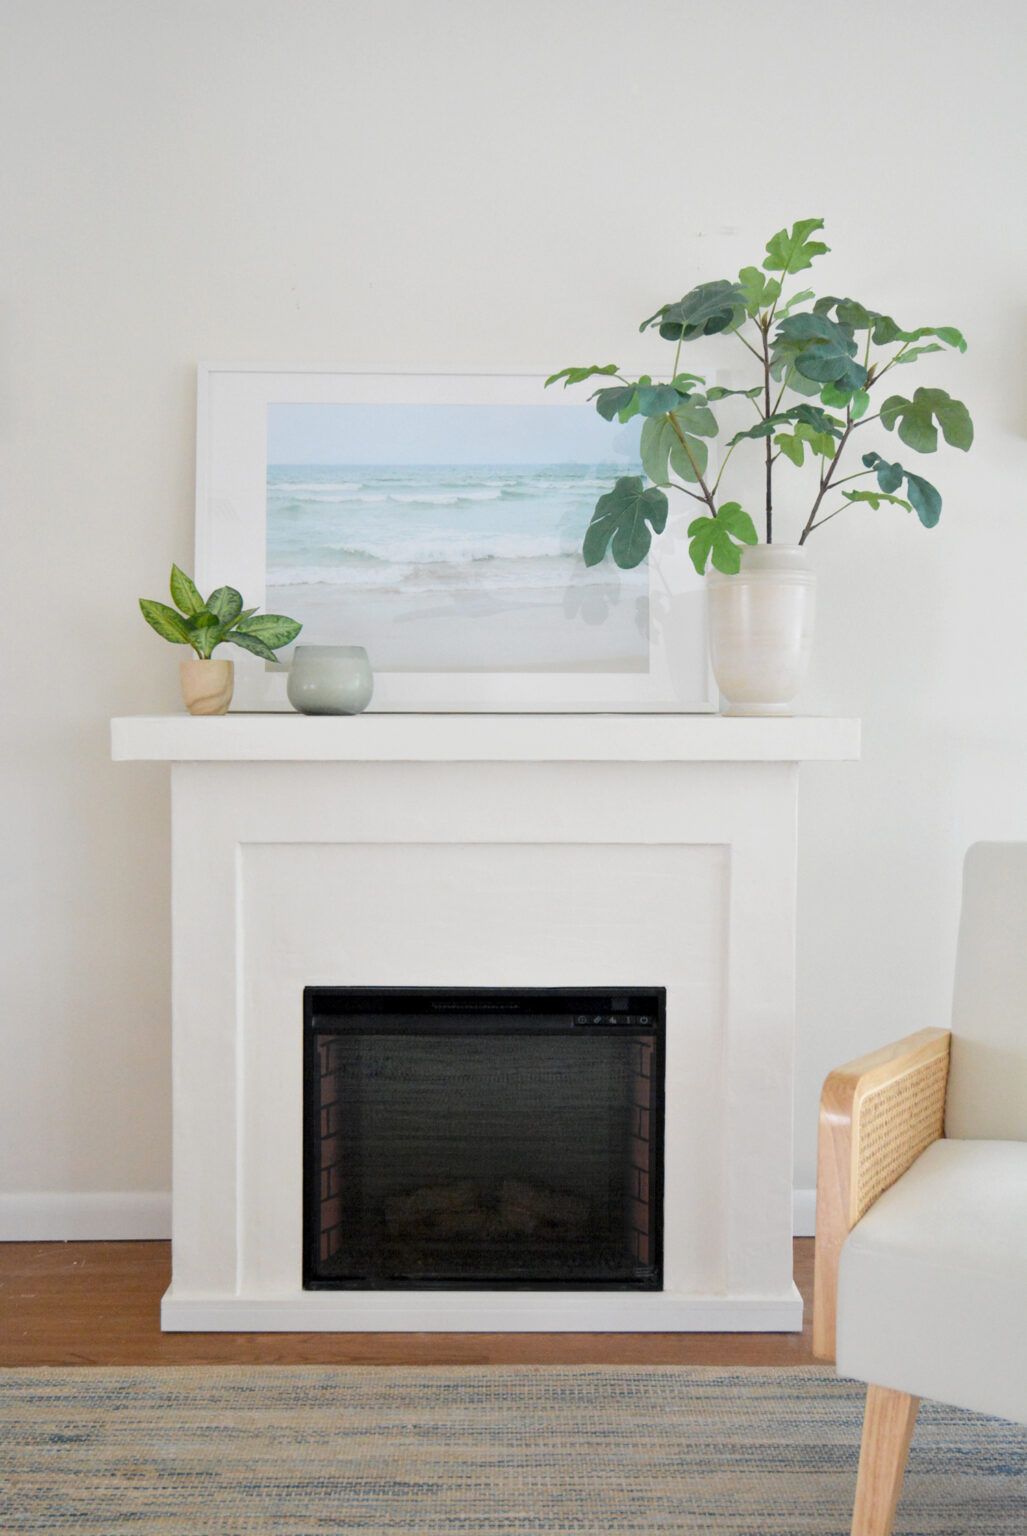 Florida House: Transforming an Electric Fireplace with a DIY Makeover